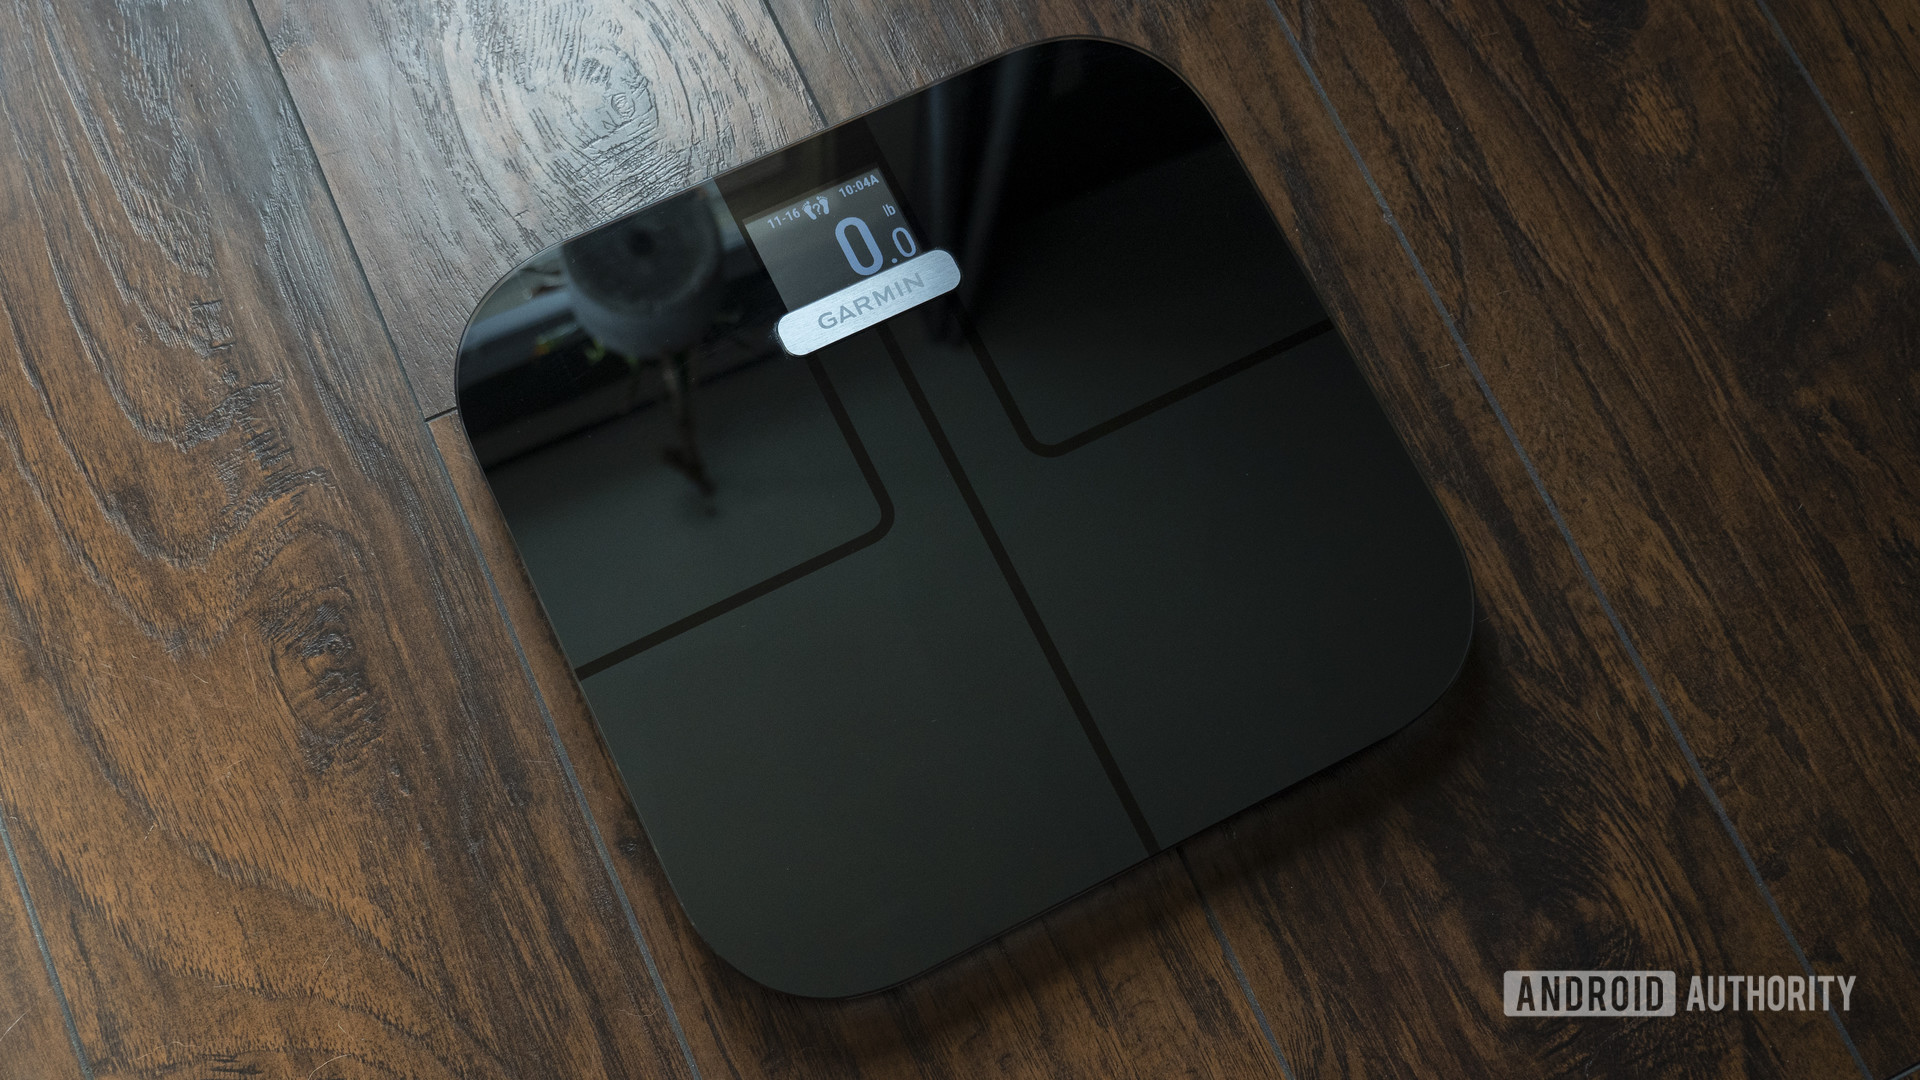 https://www.androidauthority.com/wp-content/uploads/2020/11/garmin-index-s2-smart-scale-review-scale-on-floor.jpg